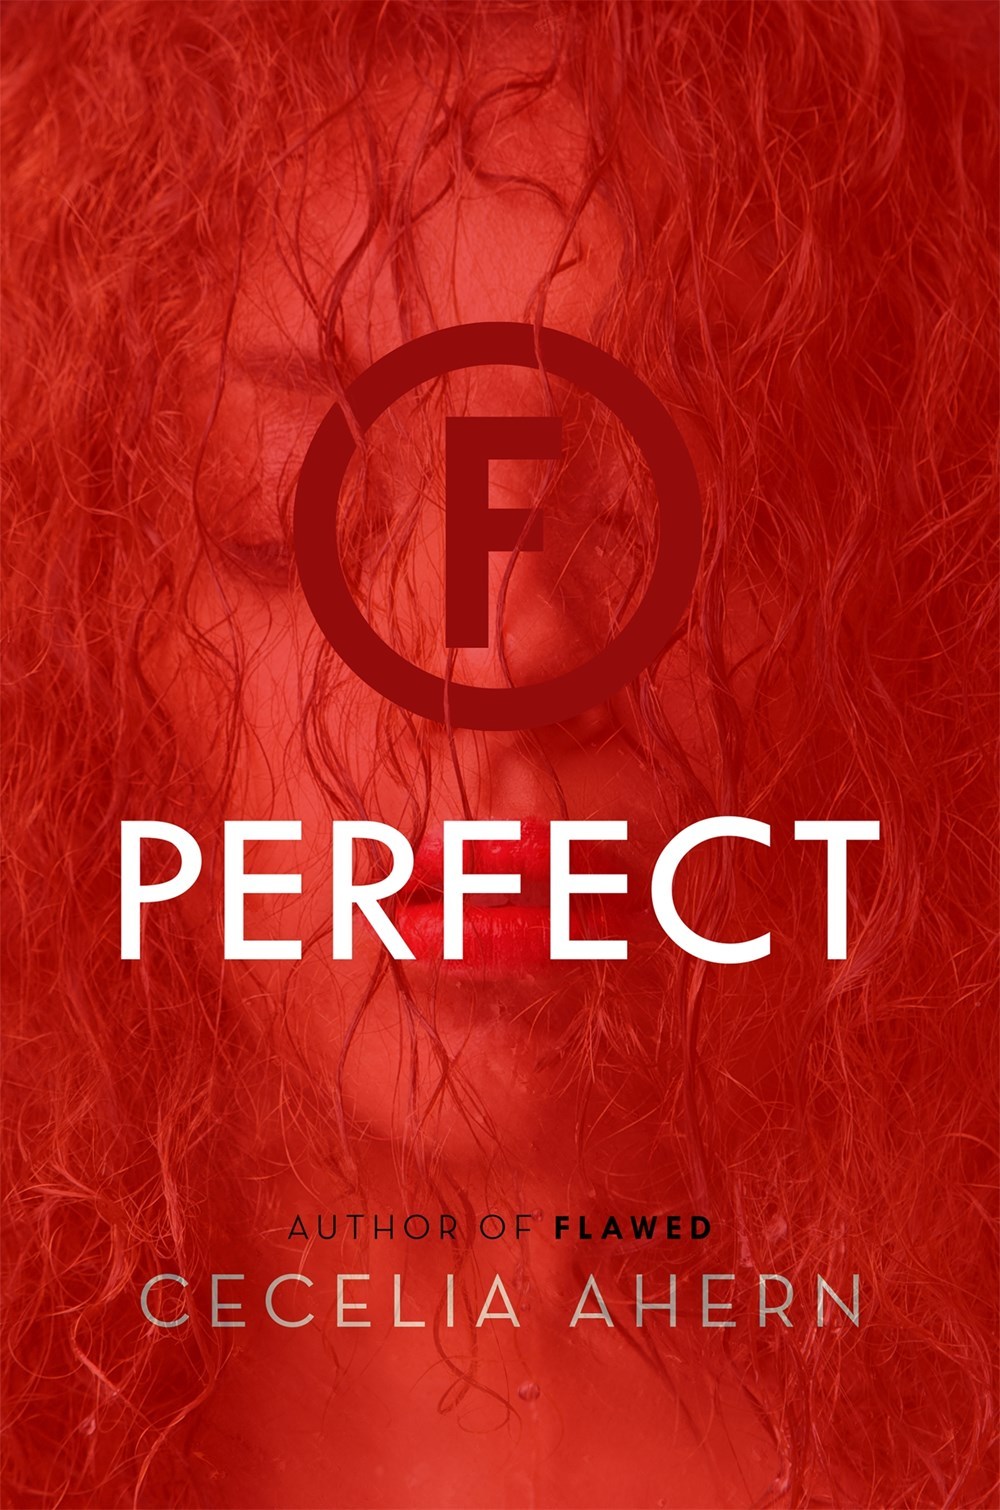 Perfect (Flawed, #2)